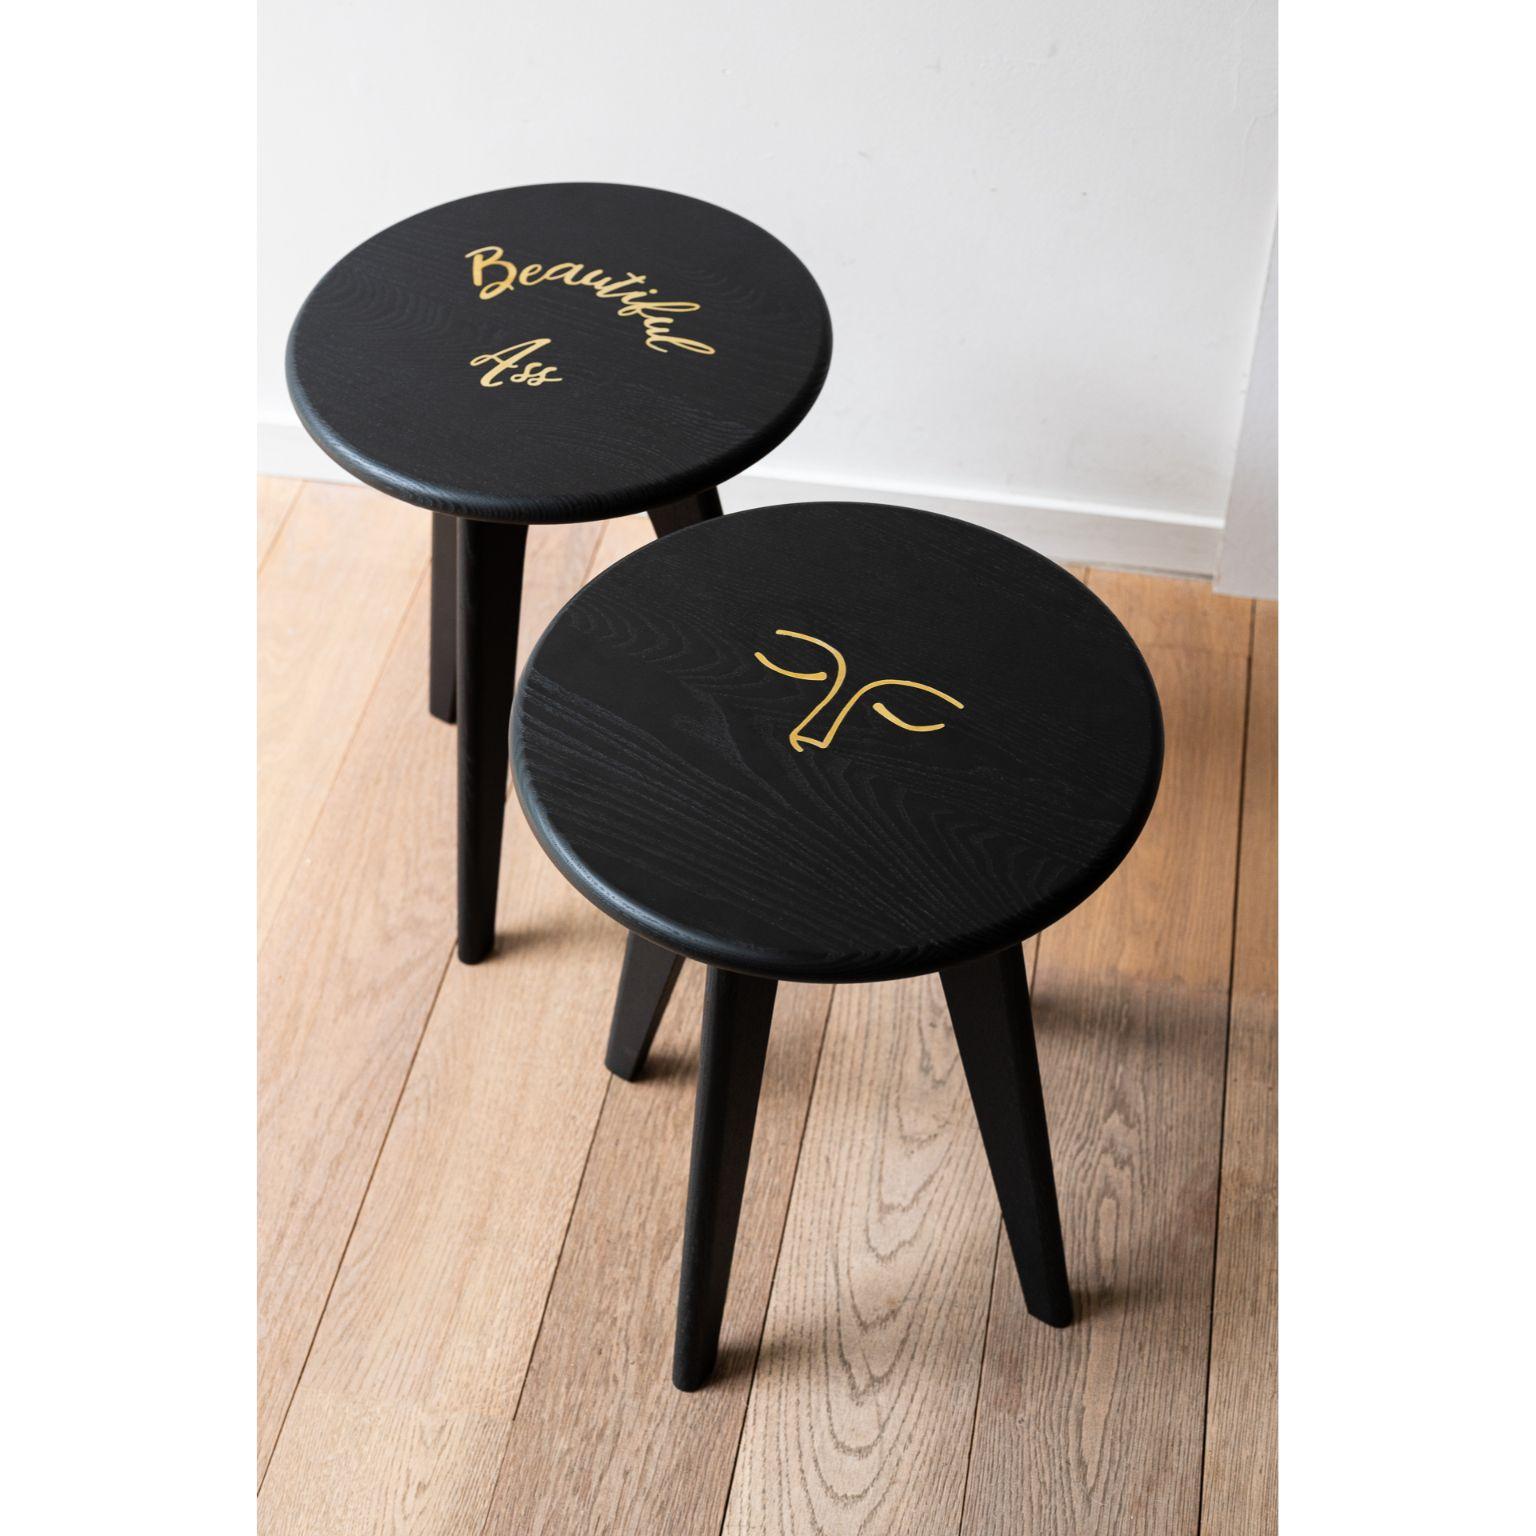 Set of 2 Black Stained Ash ASSY Stool by Mademoiselle Jo
Dimensions: Ø 35 x H 43 cm (each).
Materials: Ash wood and brass inlay.

Available in two wood colors and several designs.  Please contact us.

At the border between design and goldsmithing,